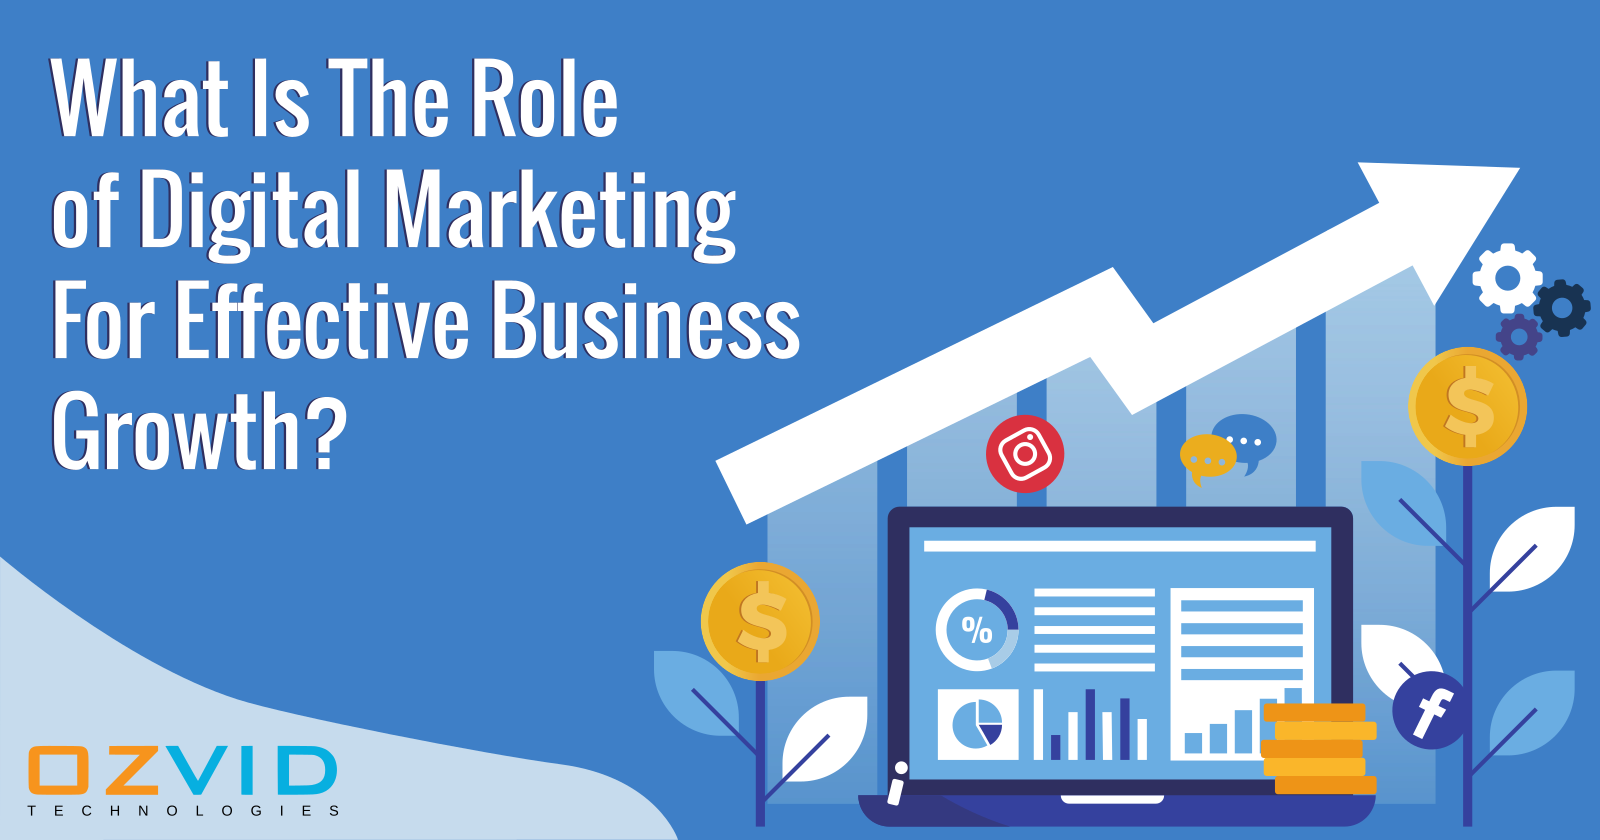 What Is The Role of Digital Marketing For Effective Business Growth?